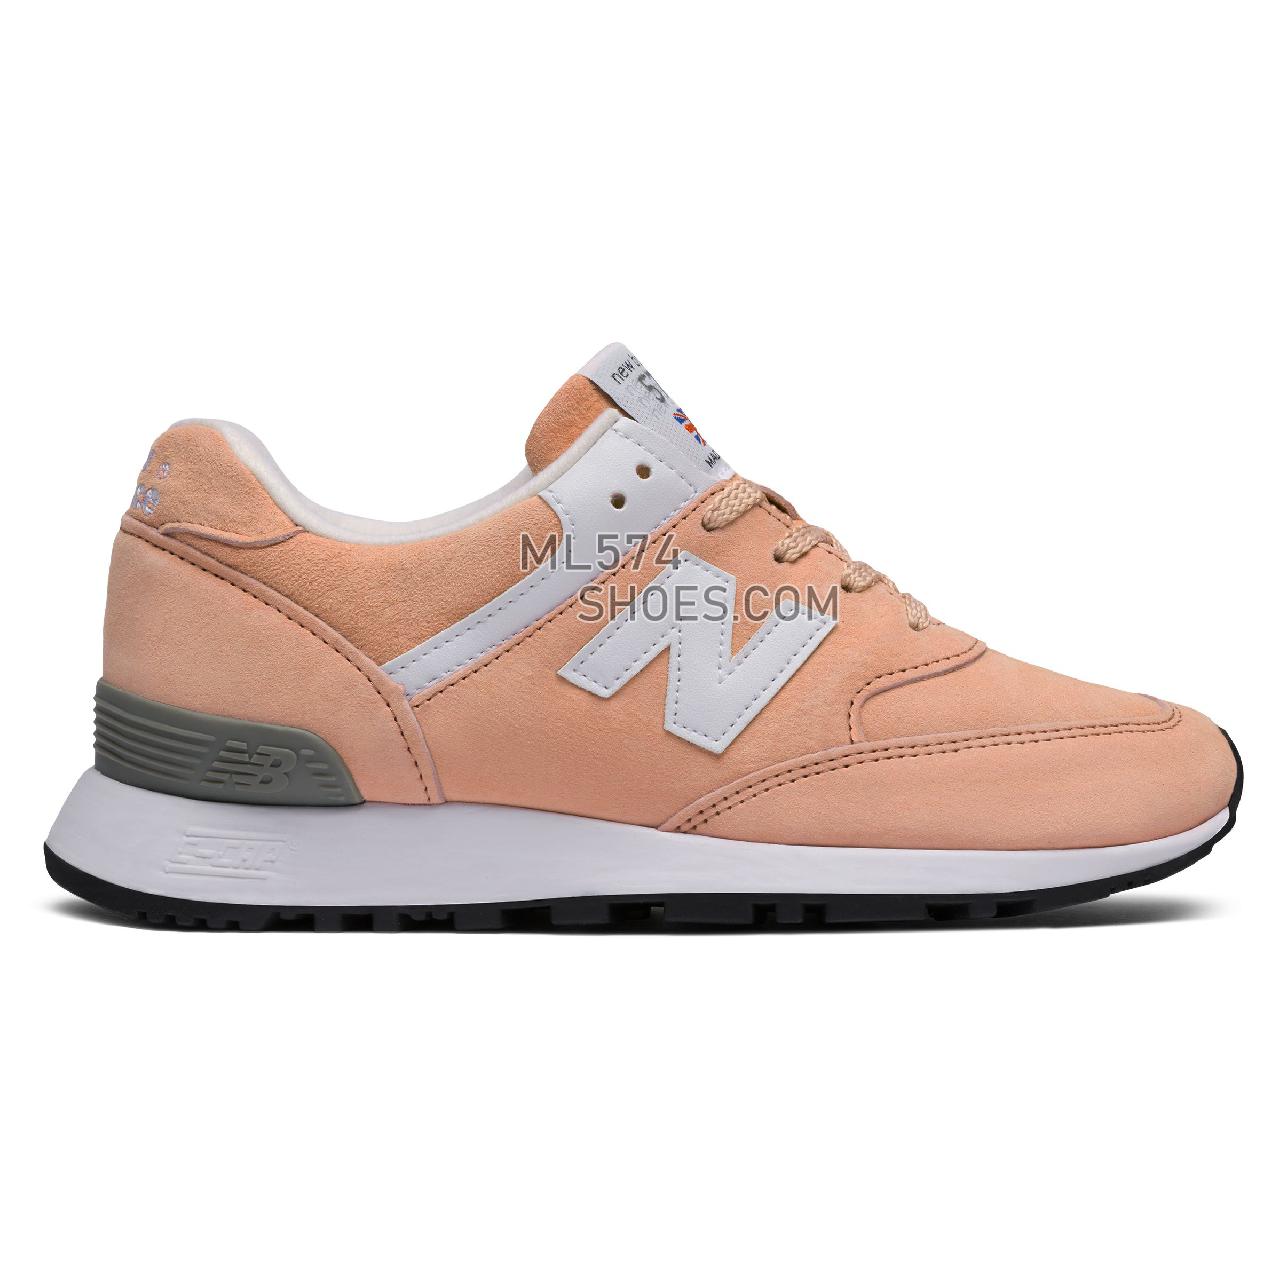 New Balance 576 Made in UK - Men's 576 Made in UK Classic W576-PS3 - Clay with White - W576LO